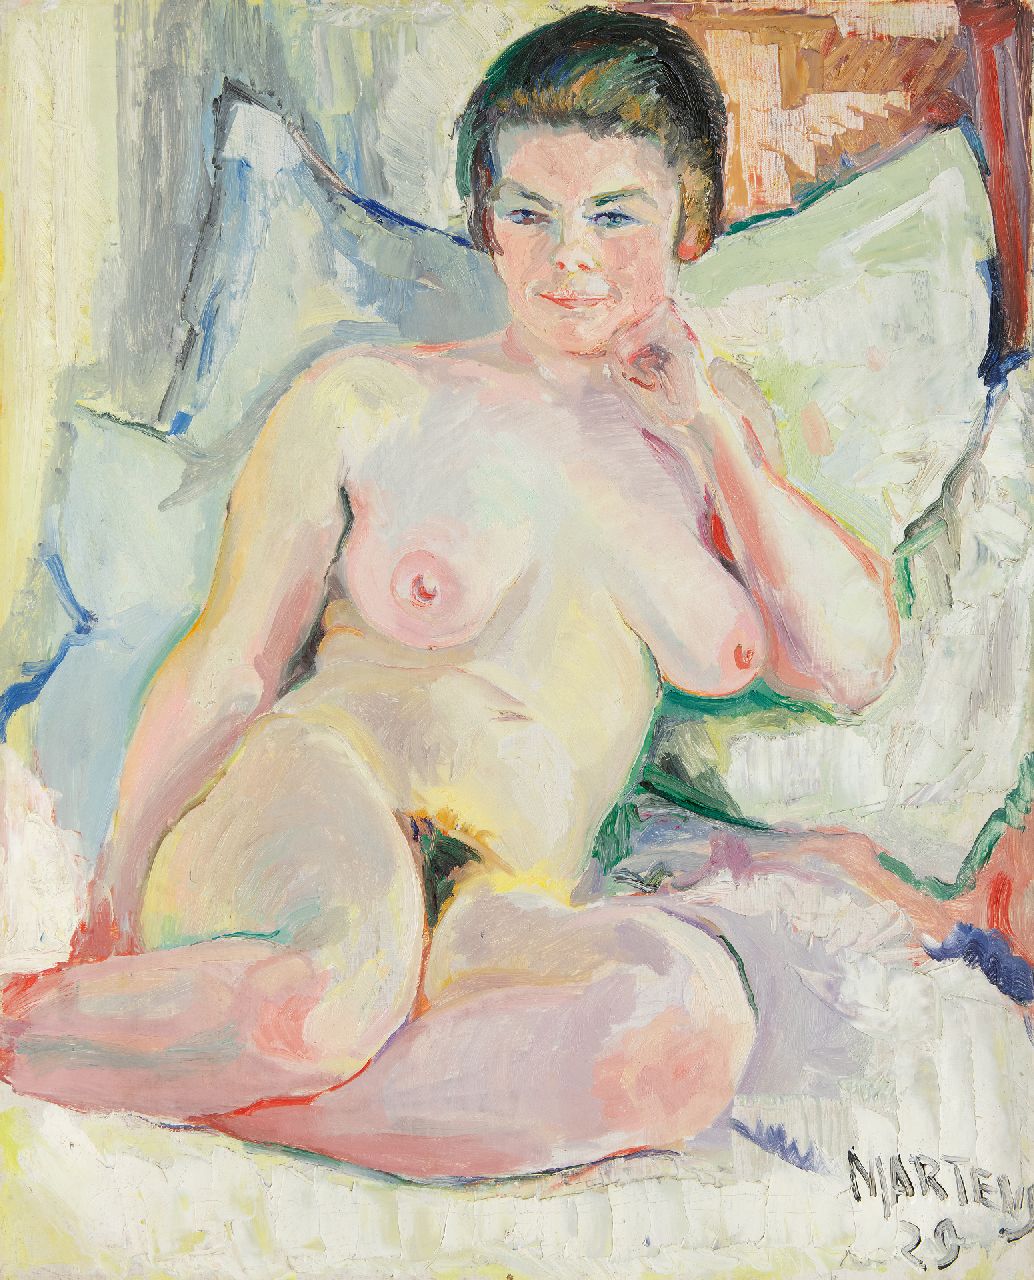 Martens G.G.  | Gijsbert 'George' Martens | Paintings offered for sale | Reclyning nude, oil on canvas 80.3 x 64.7 cm, signed l.r. and dated '29